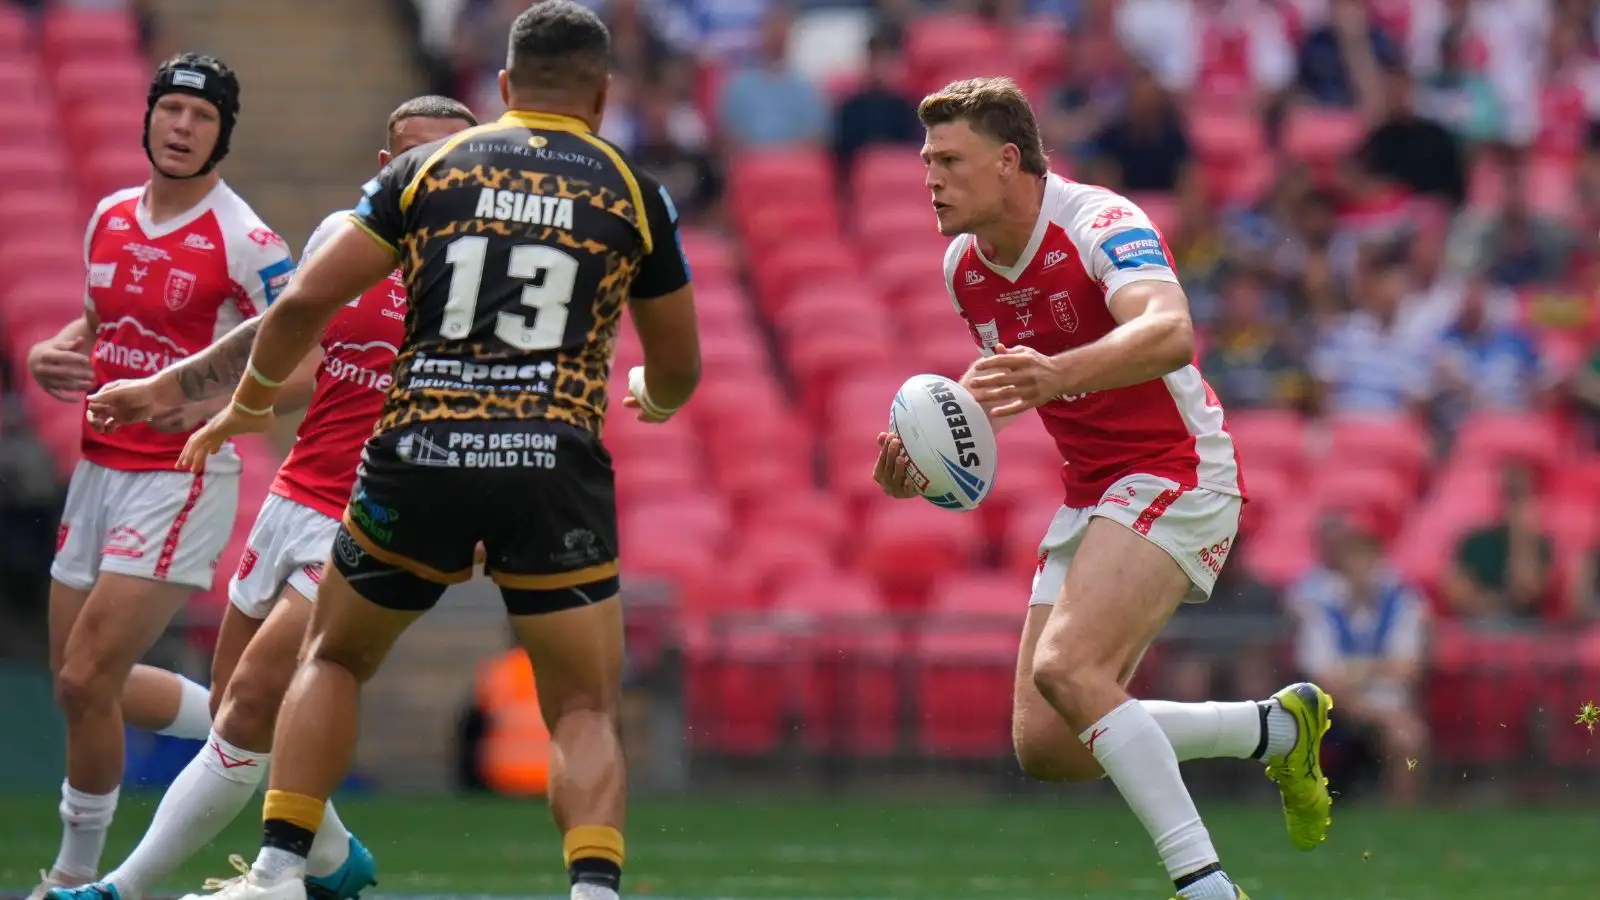 London Broncos land released Hull KR forward in third signing ahead of Super League return